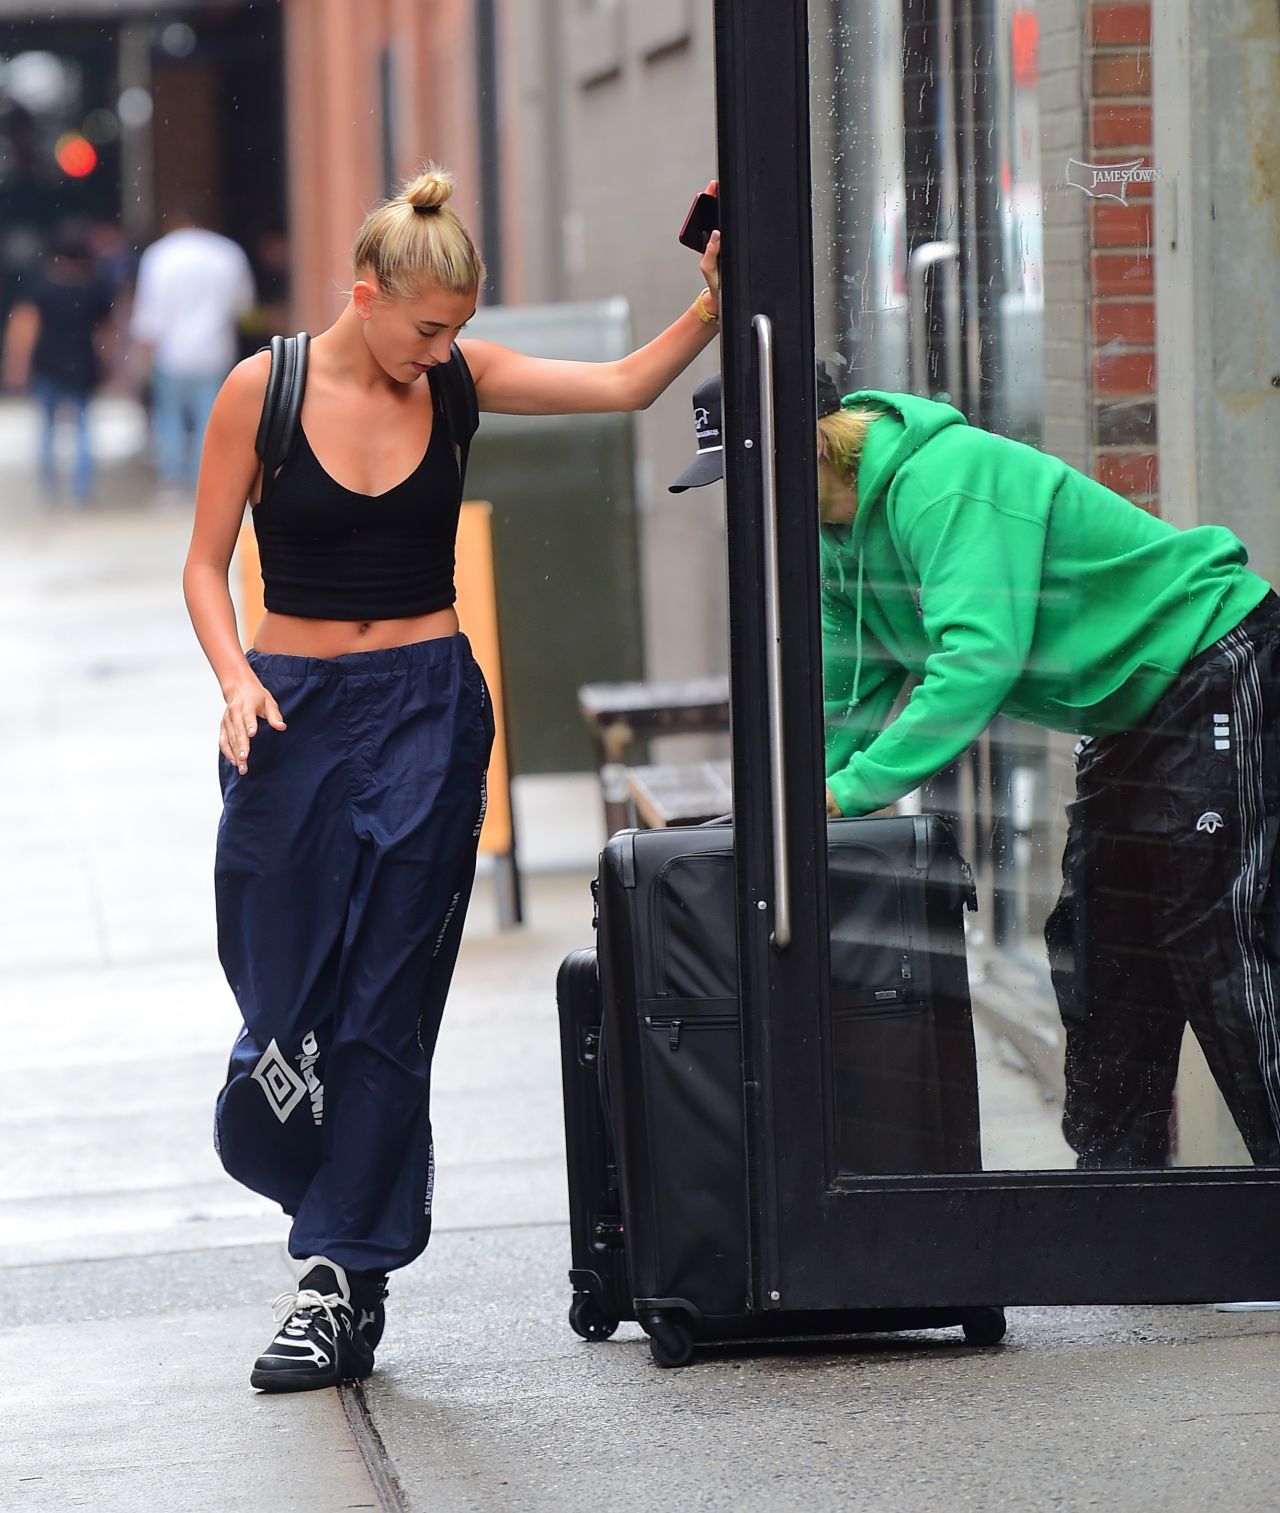 hailey-baldwin-and-justin-bieber-out-in-nyc-07-06-2018-0.jpg